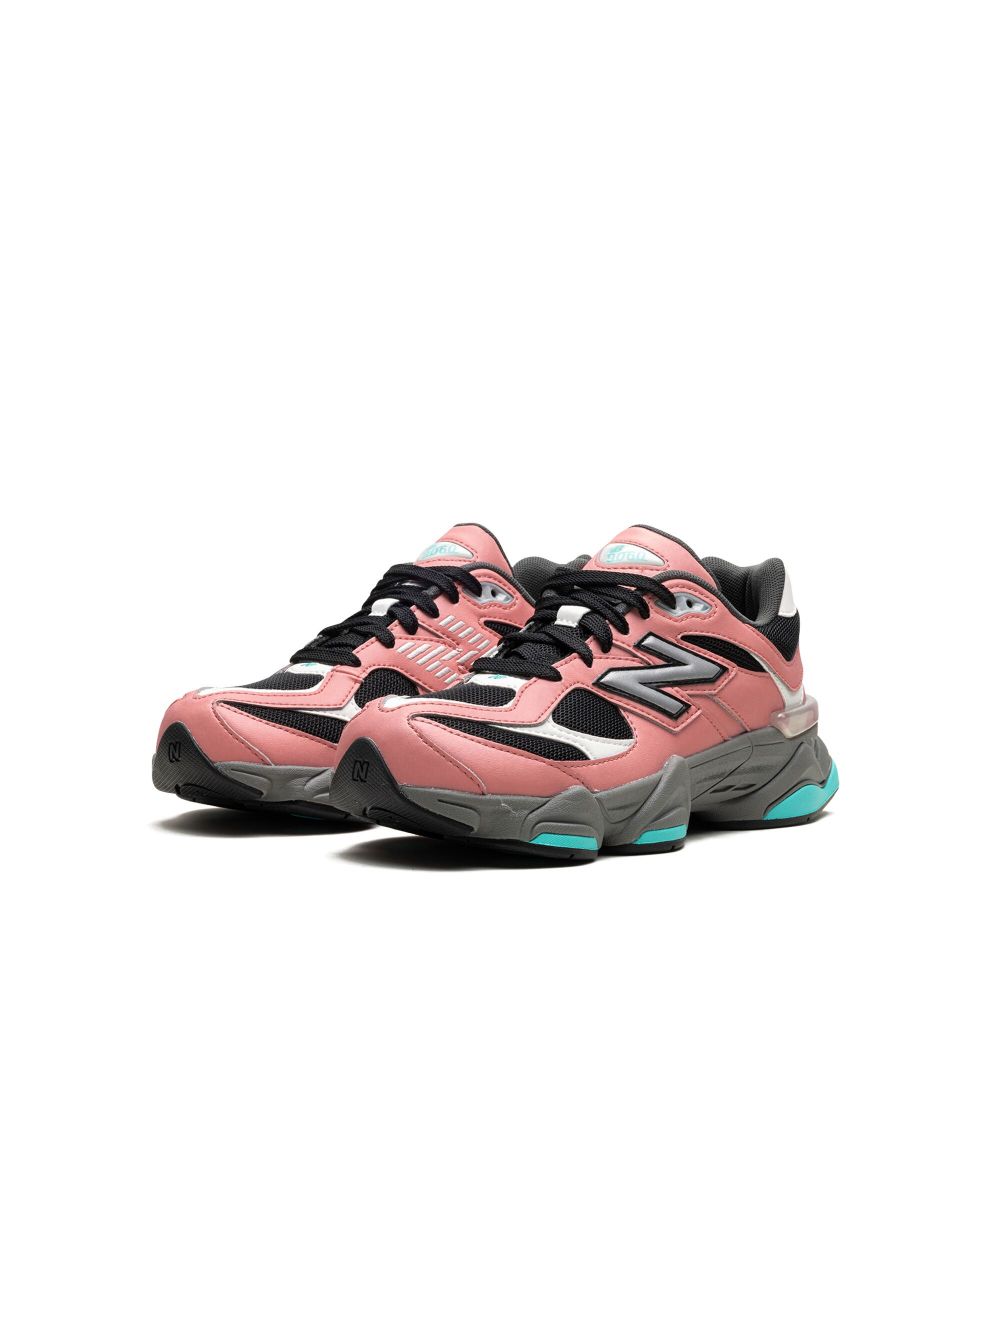 Shop New Balance 9060 "pink Teal" Leather Sneakers